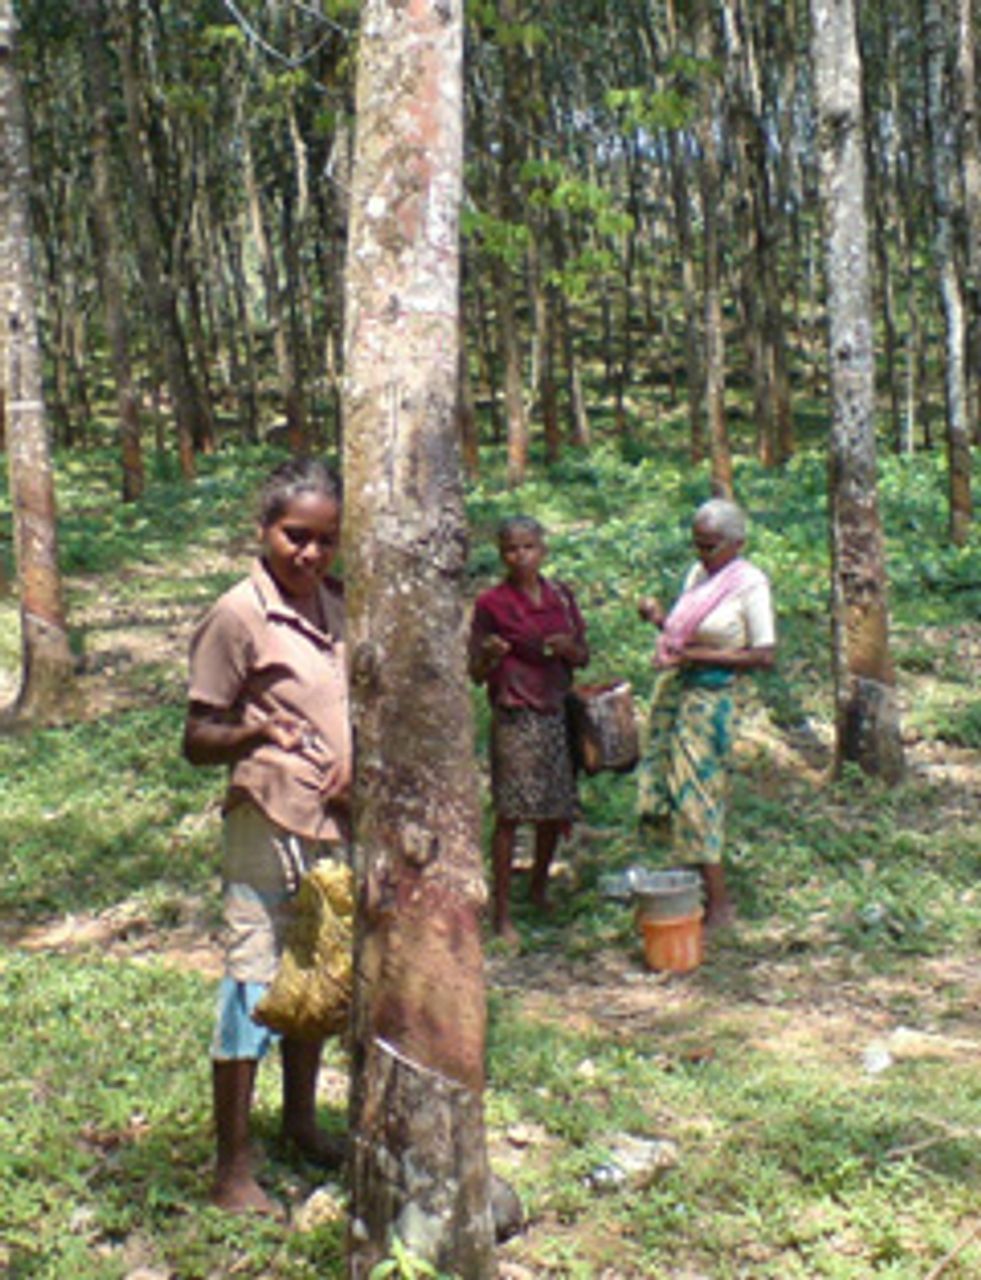 Female workers tapping rubber trees